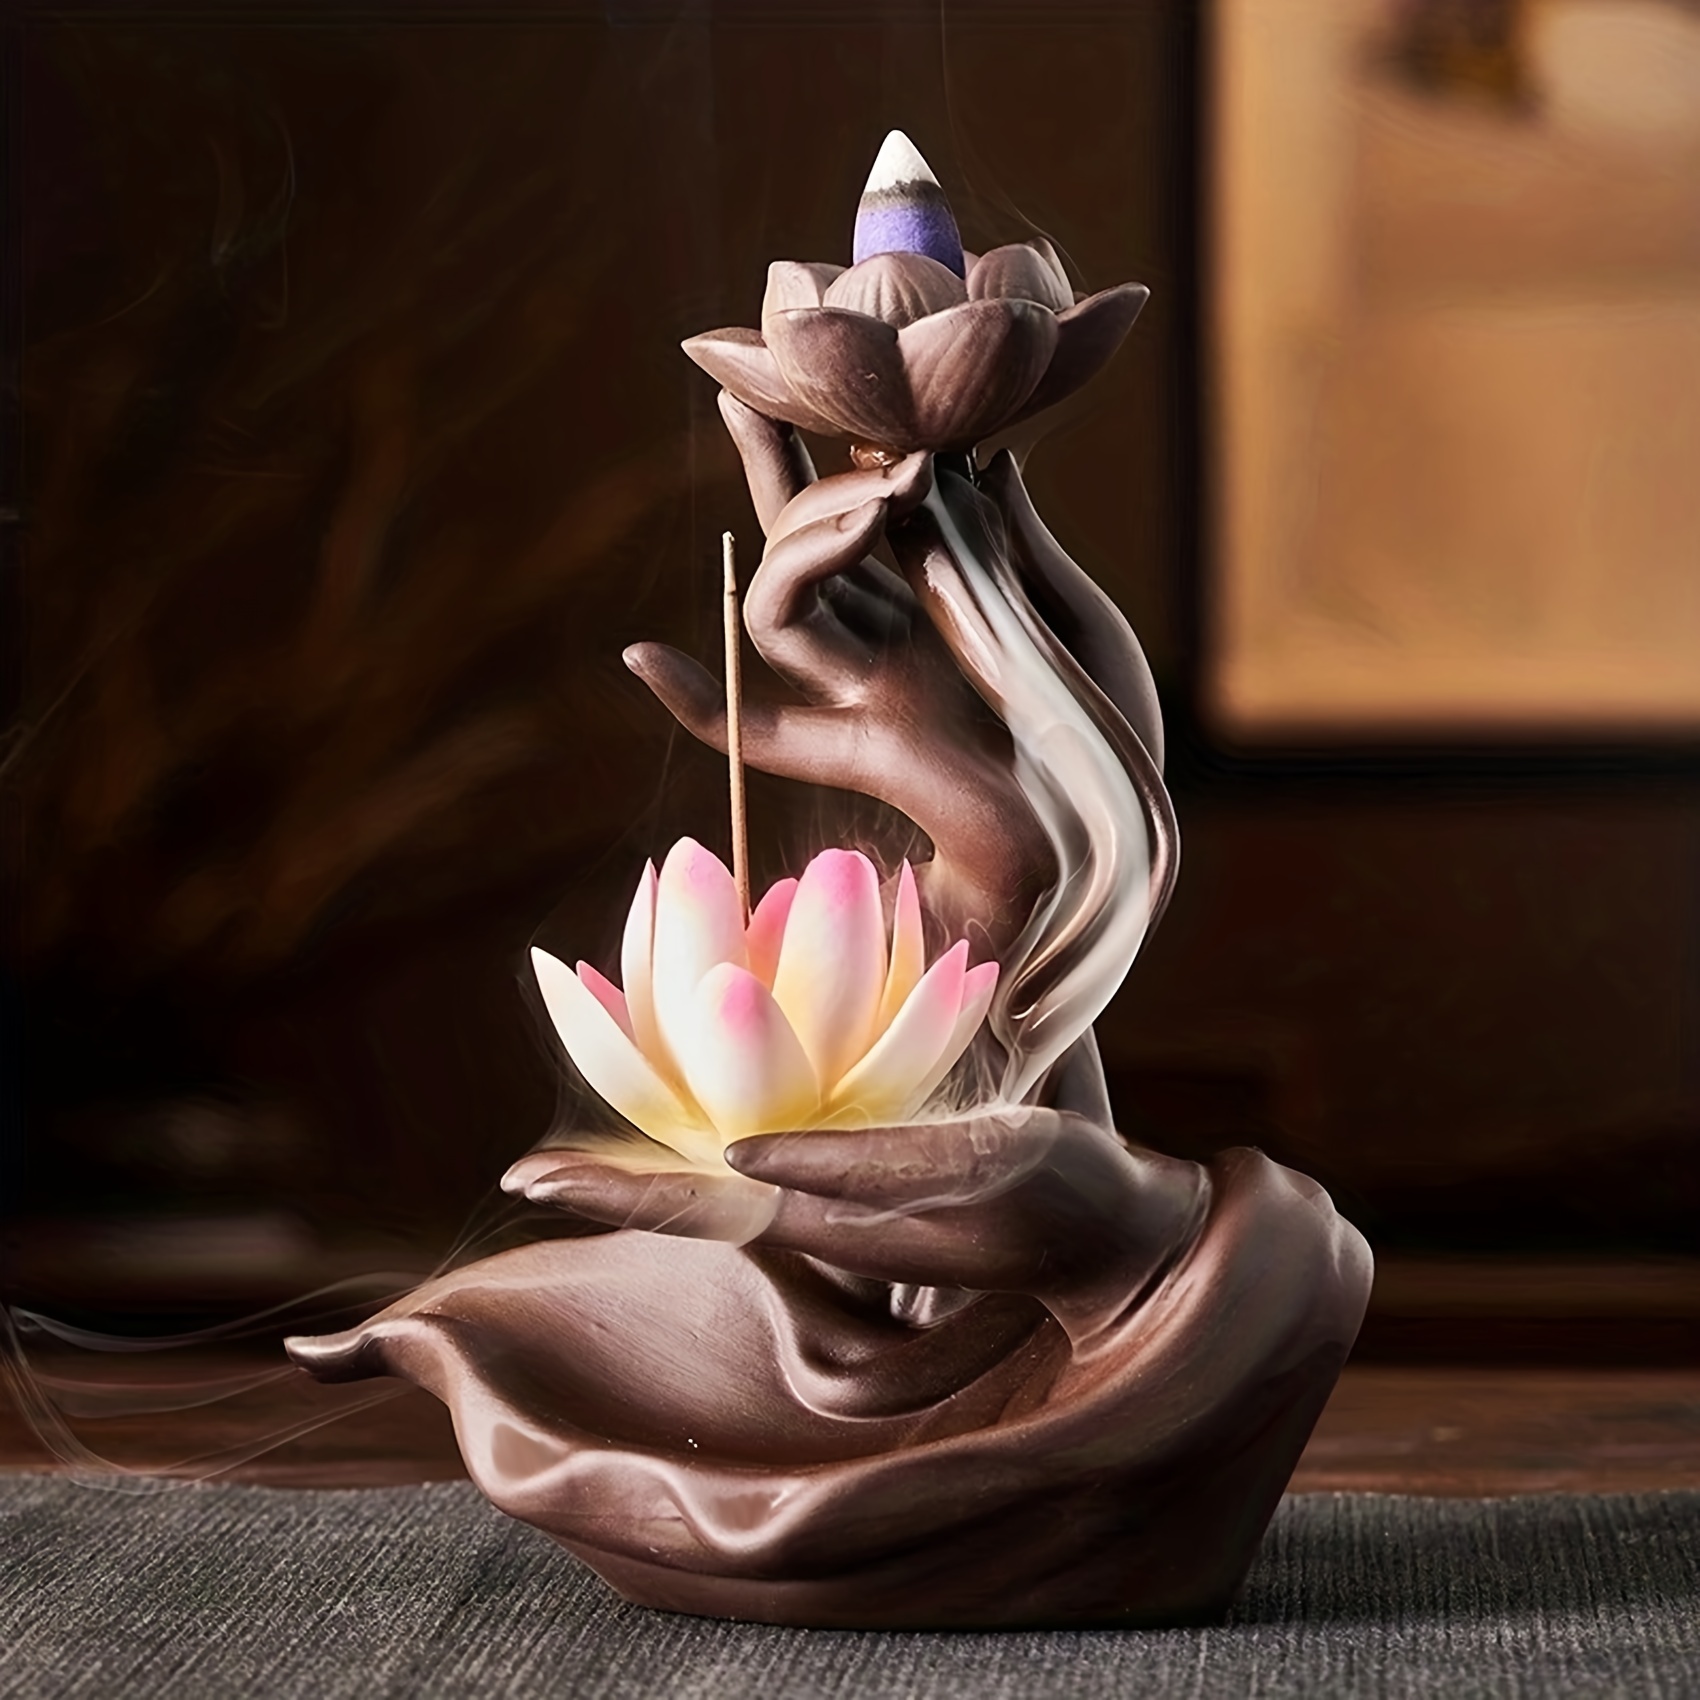 

1pc, Buddha Hand Backflow Incense Burner Holder Miniature Waterfall Colorful Lotus Flower Home Office Decoration Ornament